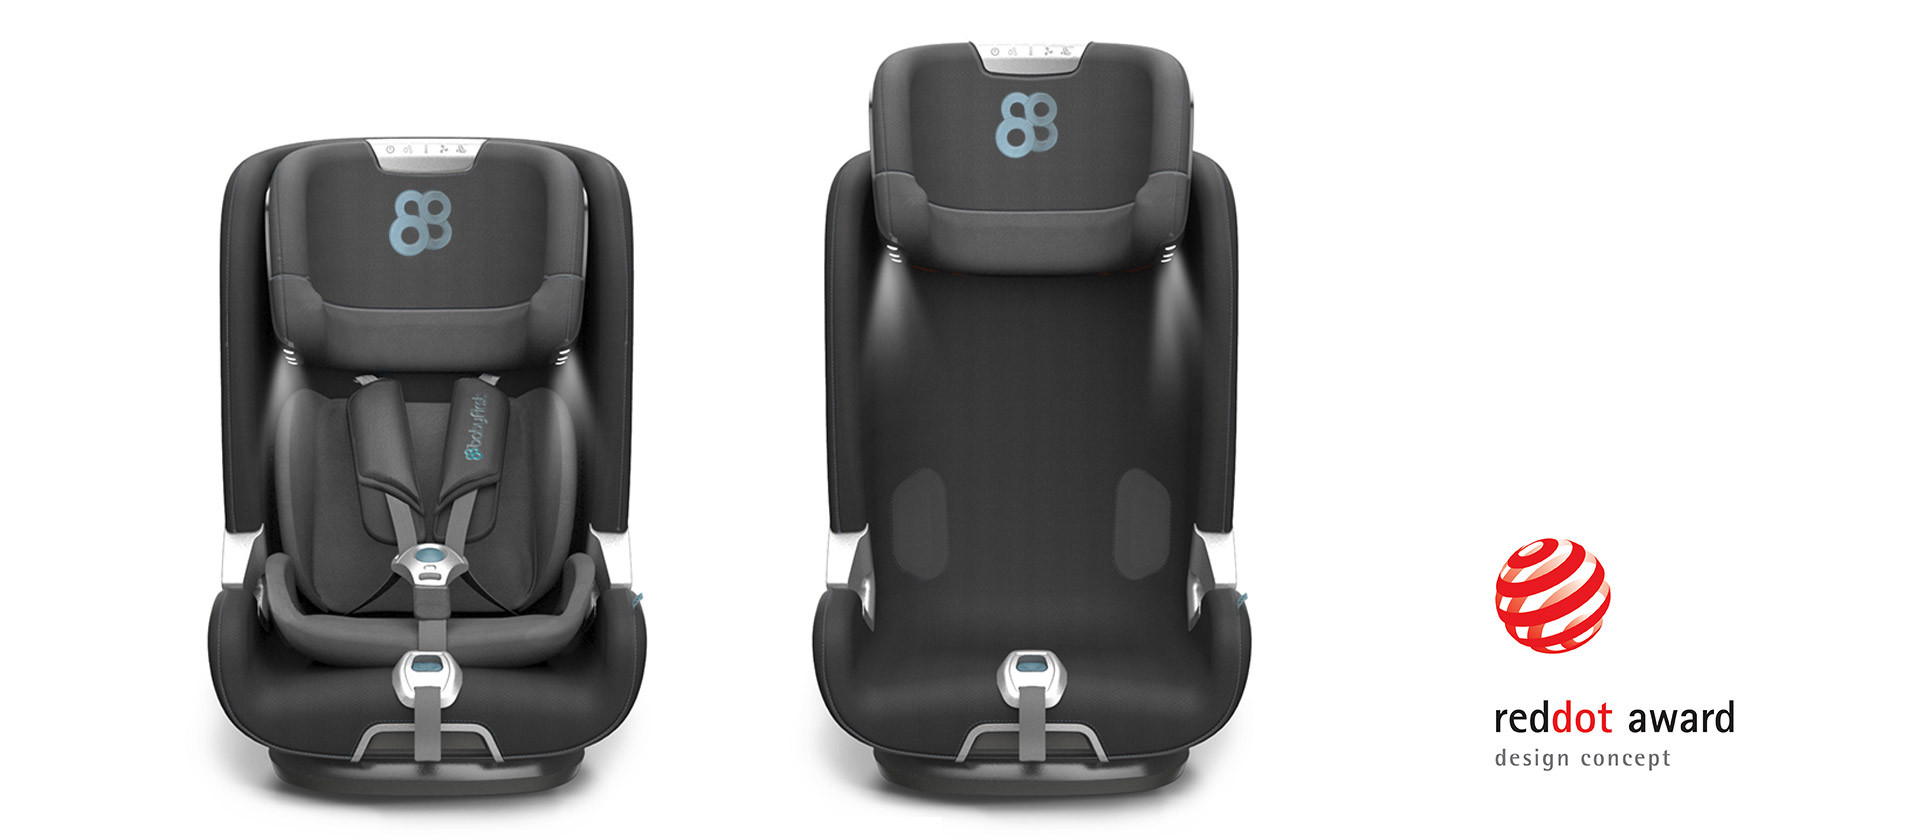 Red Dot Award winner 2018: Smart design for baby car seat with sensors and comfortable shapes